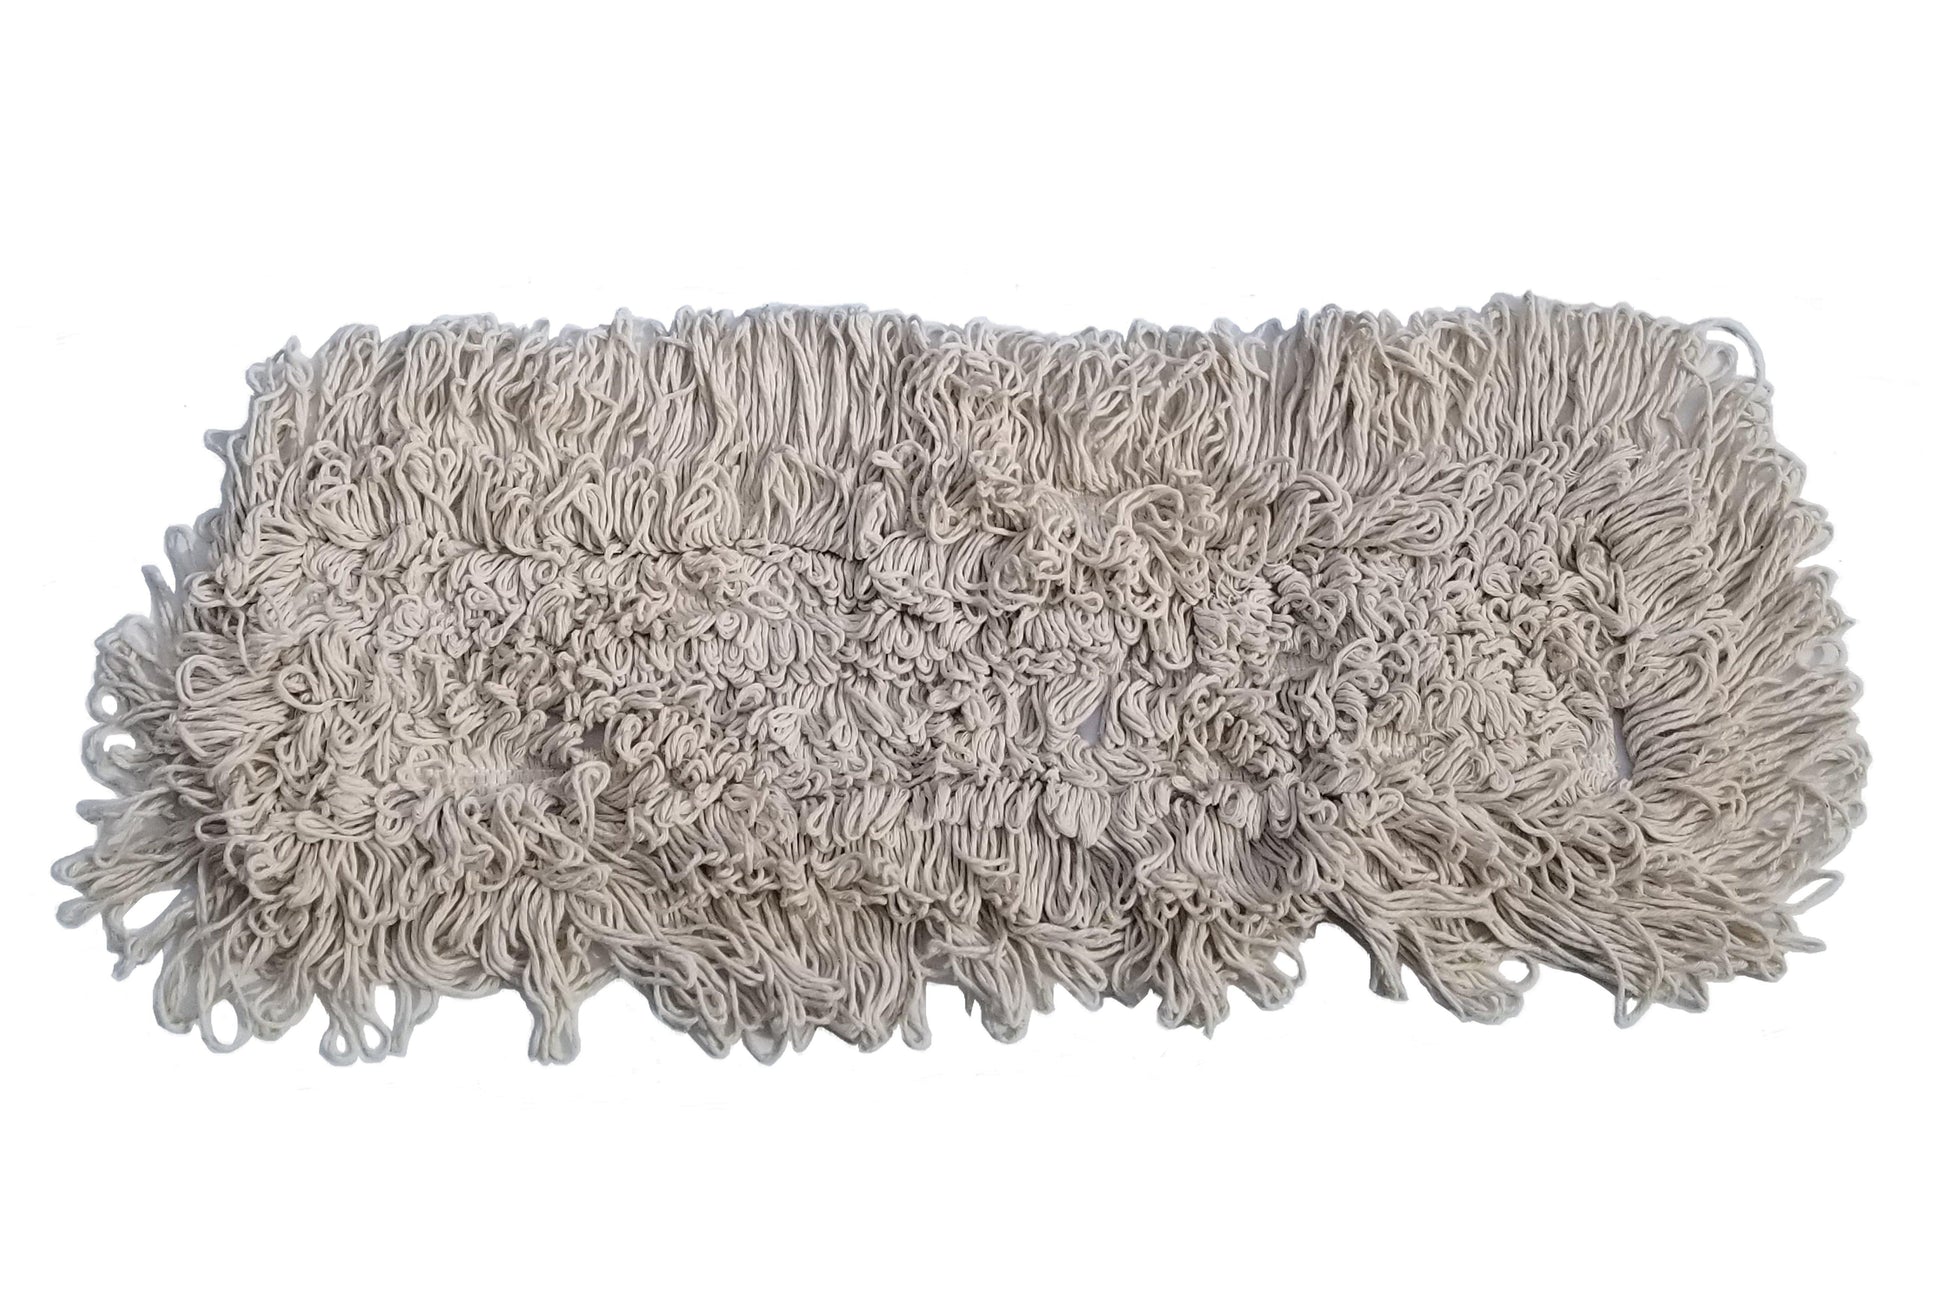 24” Closed Loop Cotton Dust Mop Heads (6 Pack)